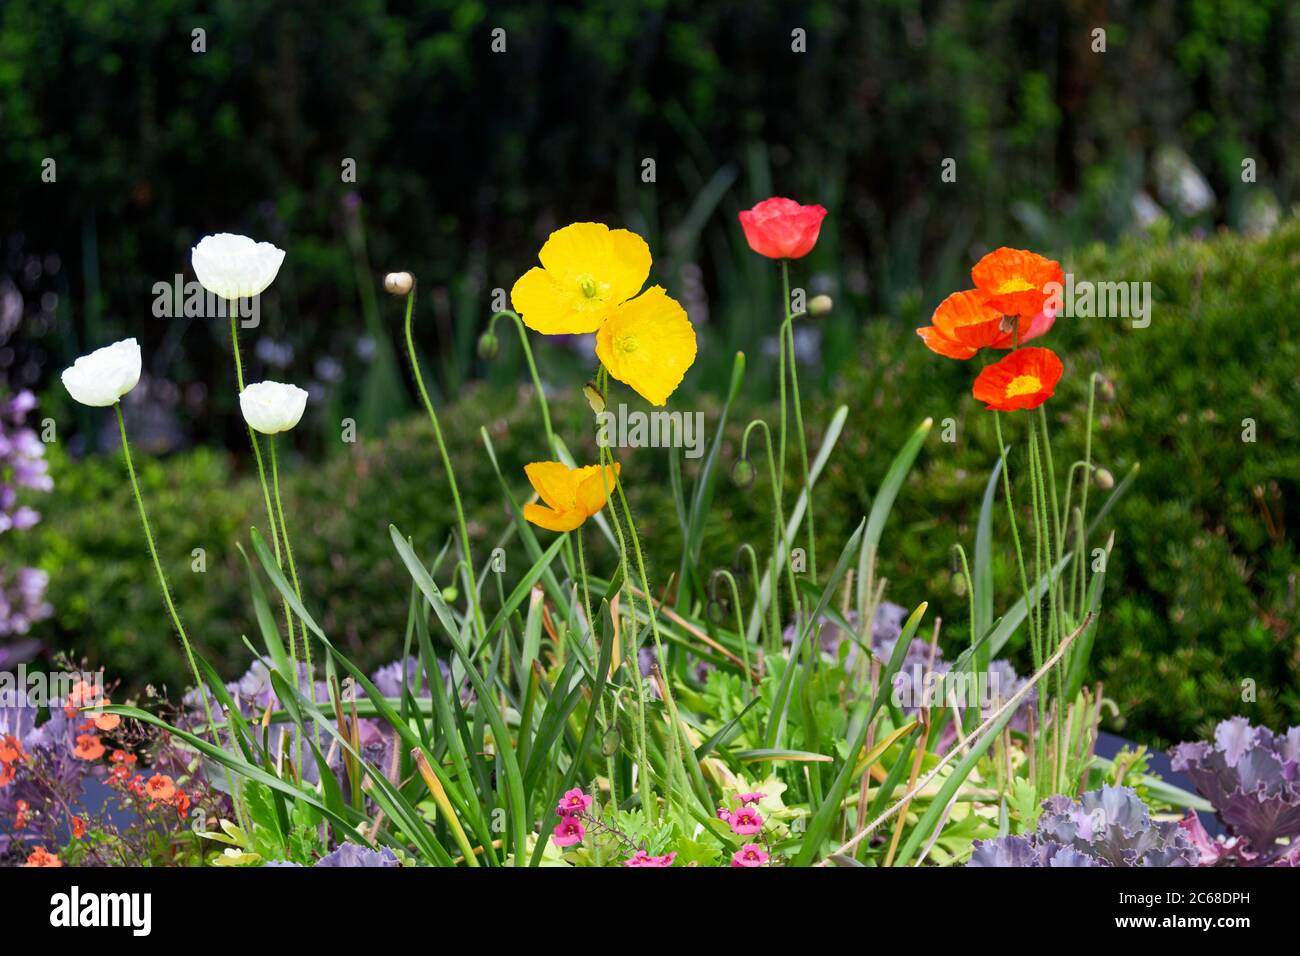 A mixed garden planting featuring poppies, flowering kale, and calibrachoa blooms. Stock Photo